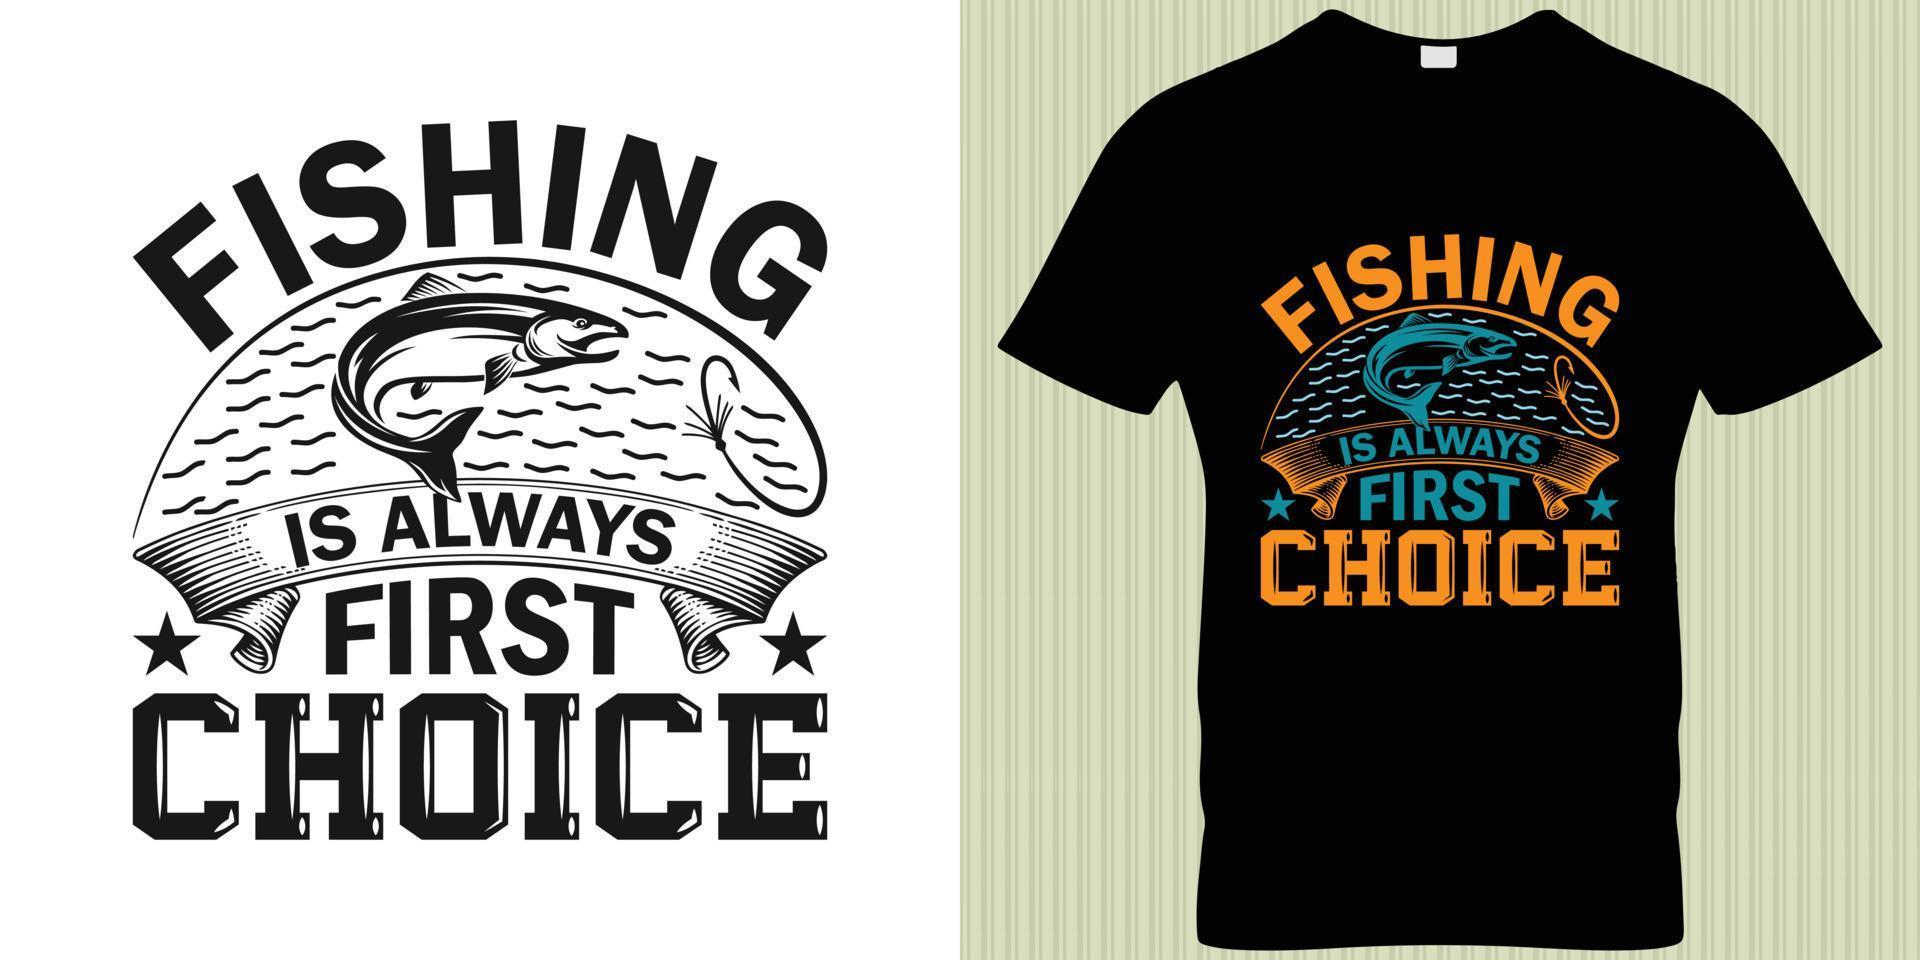 Fishing vector t-shirt design samples with illustration of a fish and a fishing.